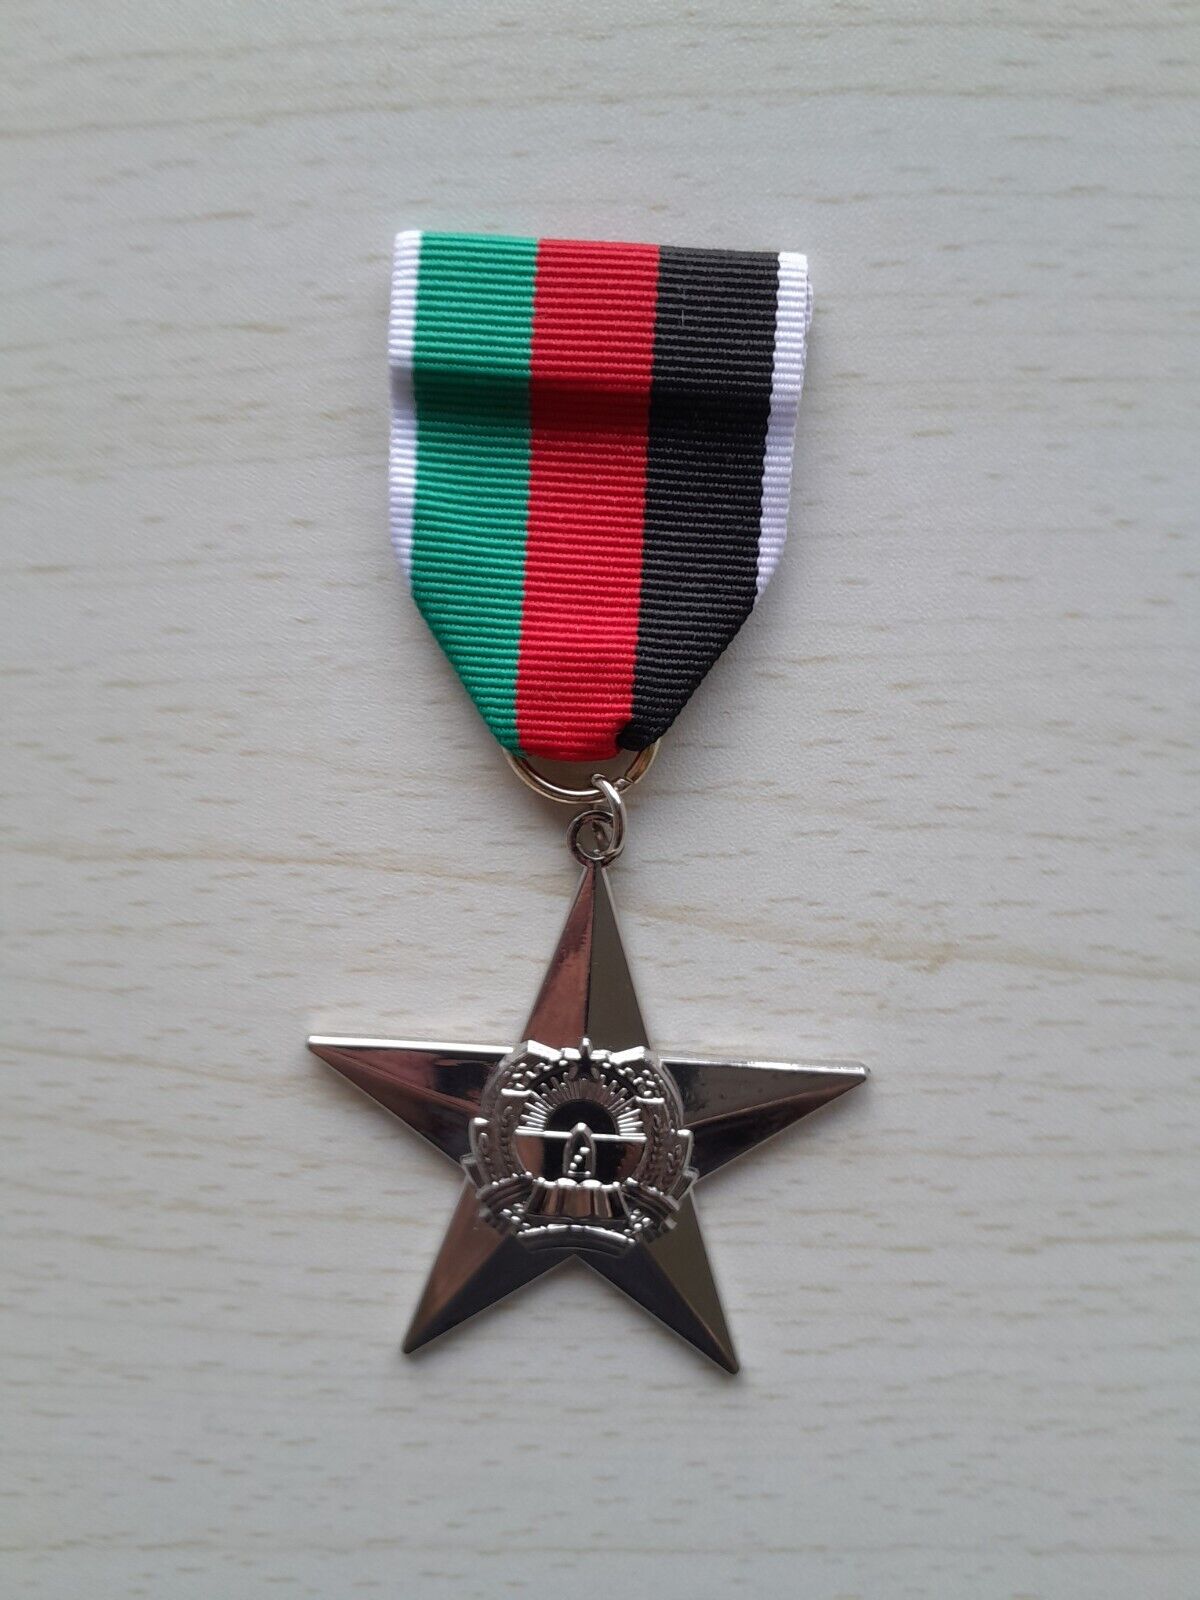 AFGHANISTAN ORDER OF THE STAR, 3RD CLASS